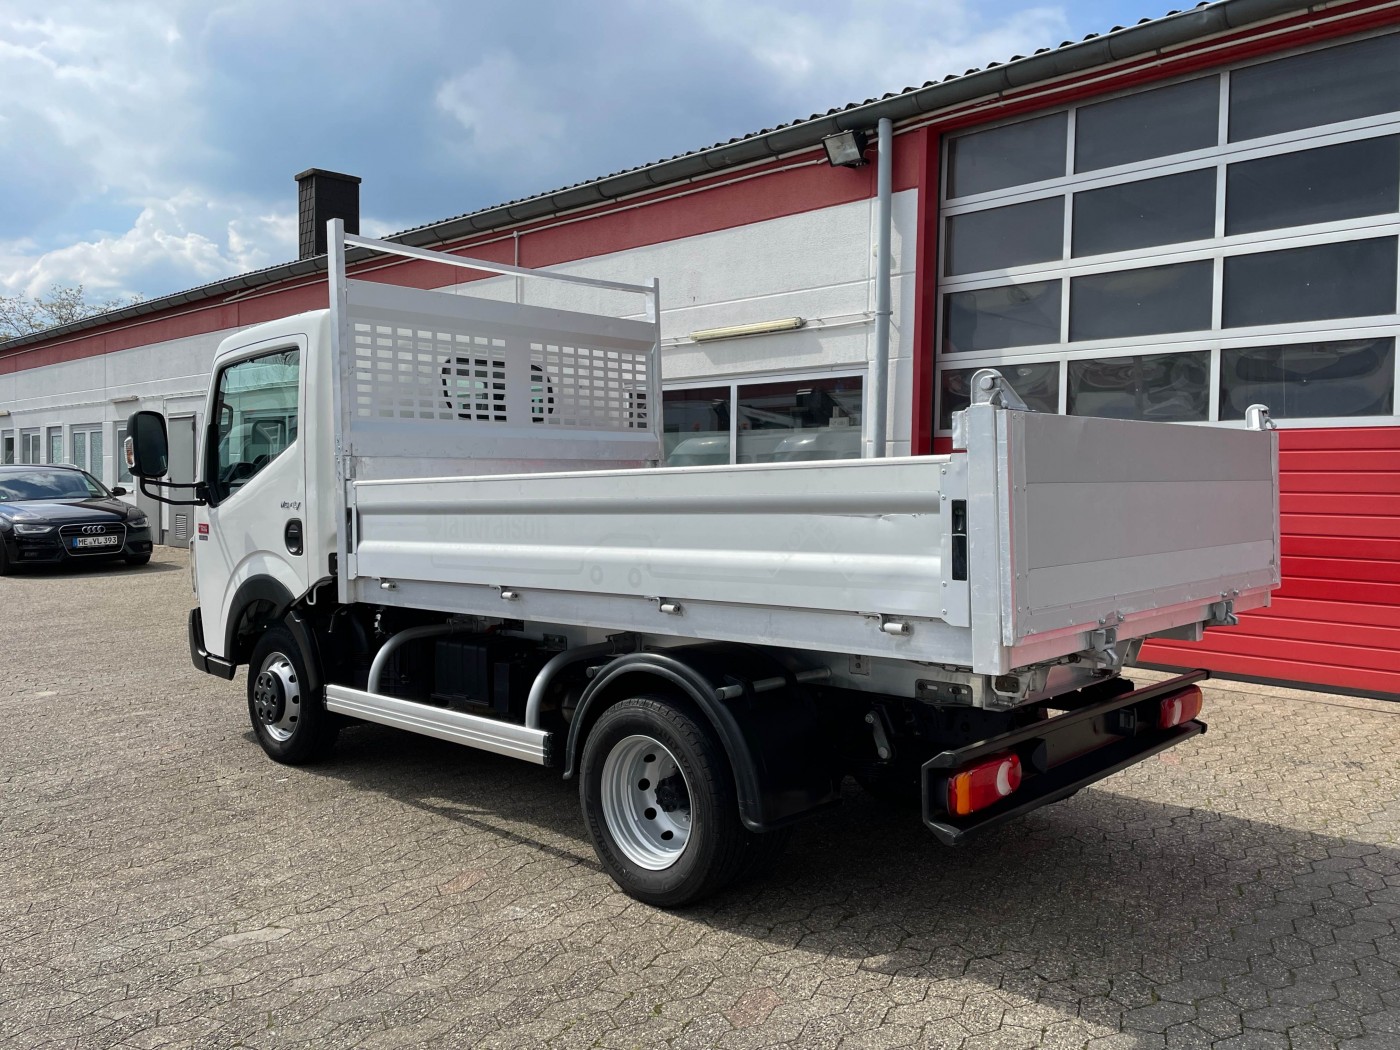 Renault  Maxity 140 DXI tipper 3 seats payload 1400 kg! 